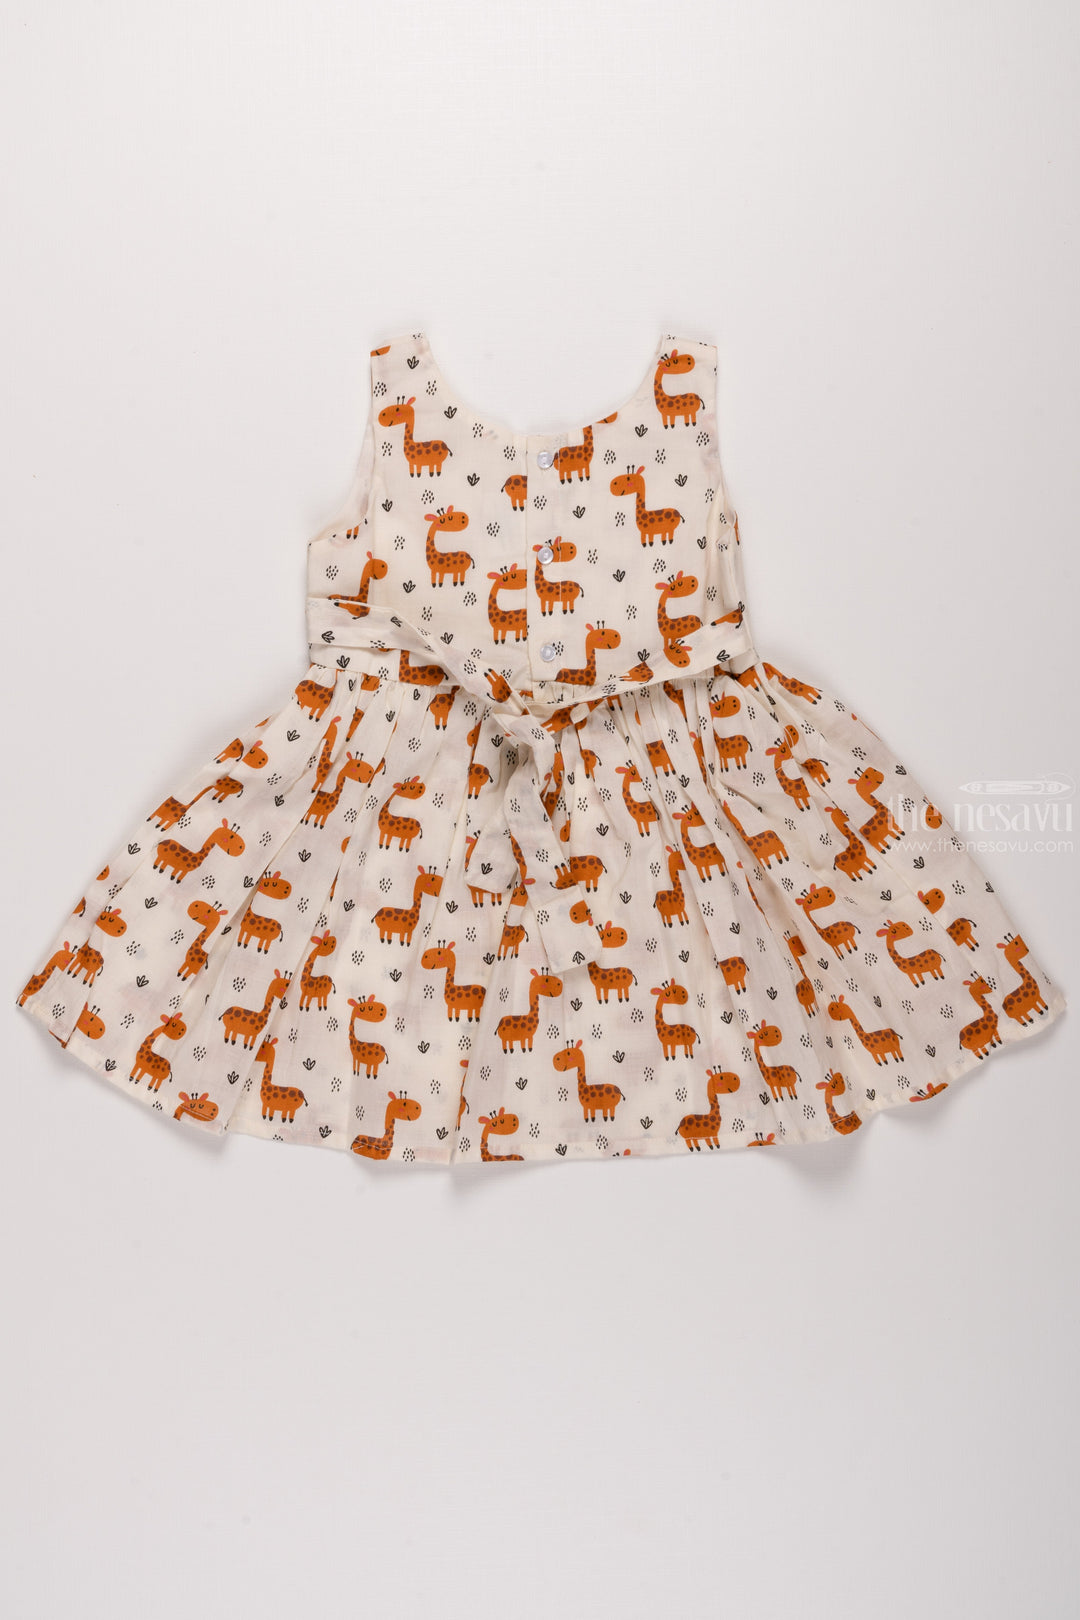 The Nesavu Baby Cotton Frocks Giraffe Giggles: Adorable Giraffe-Patterned Baby Cotton Frock Nesavu Elegant Baby Formal Wear | Sophisticated Frocks for Special Occasions | The Nesavu